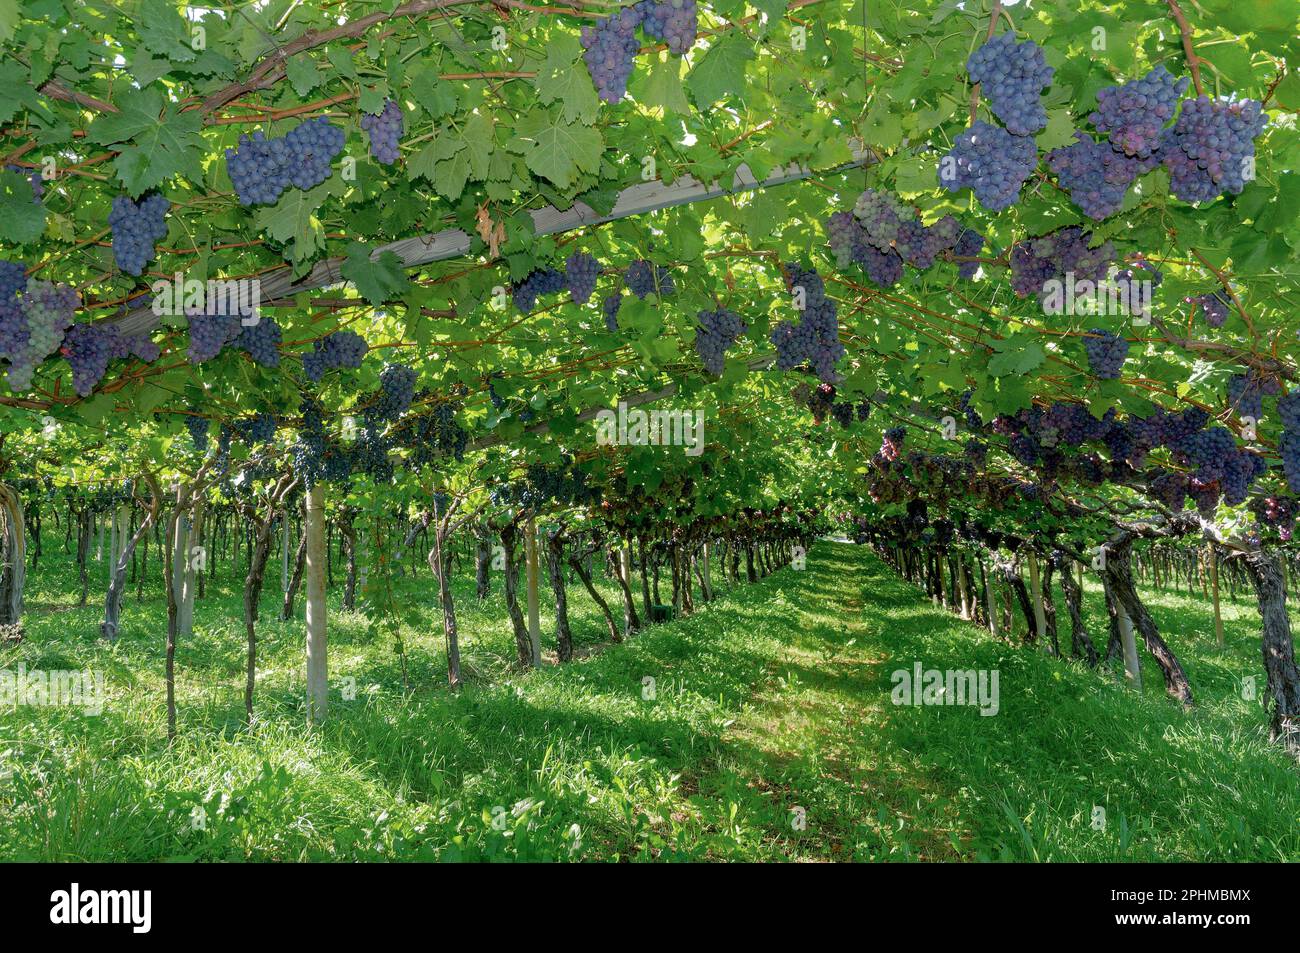 traditional Winegrowing in Trentino,South Tyrol,Italy Stock Photo